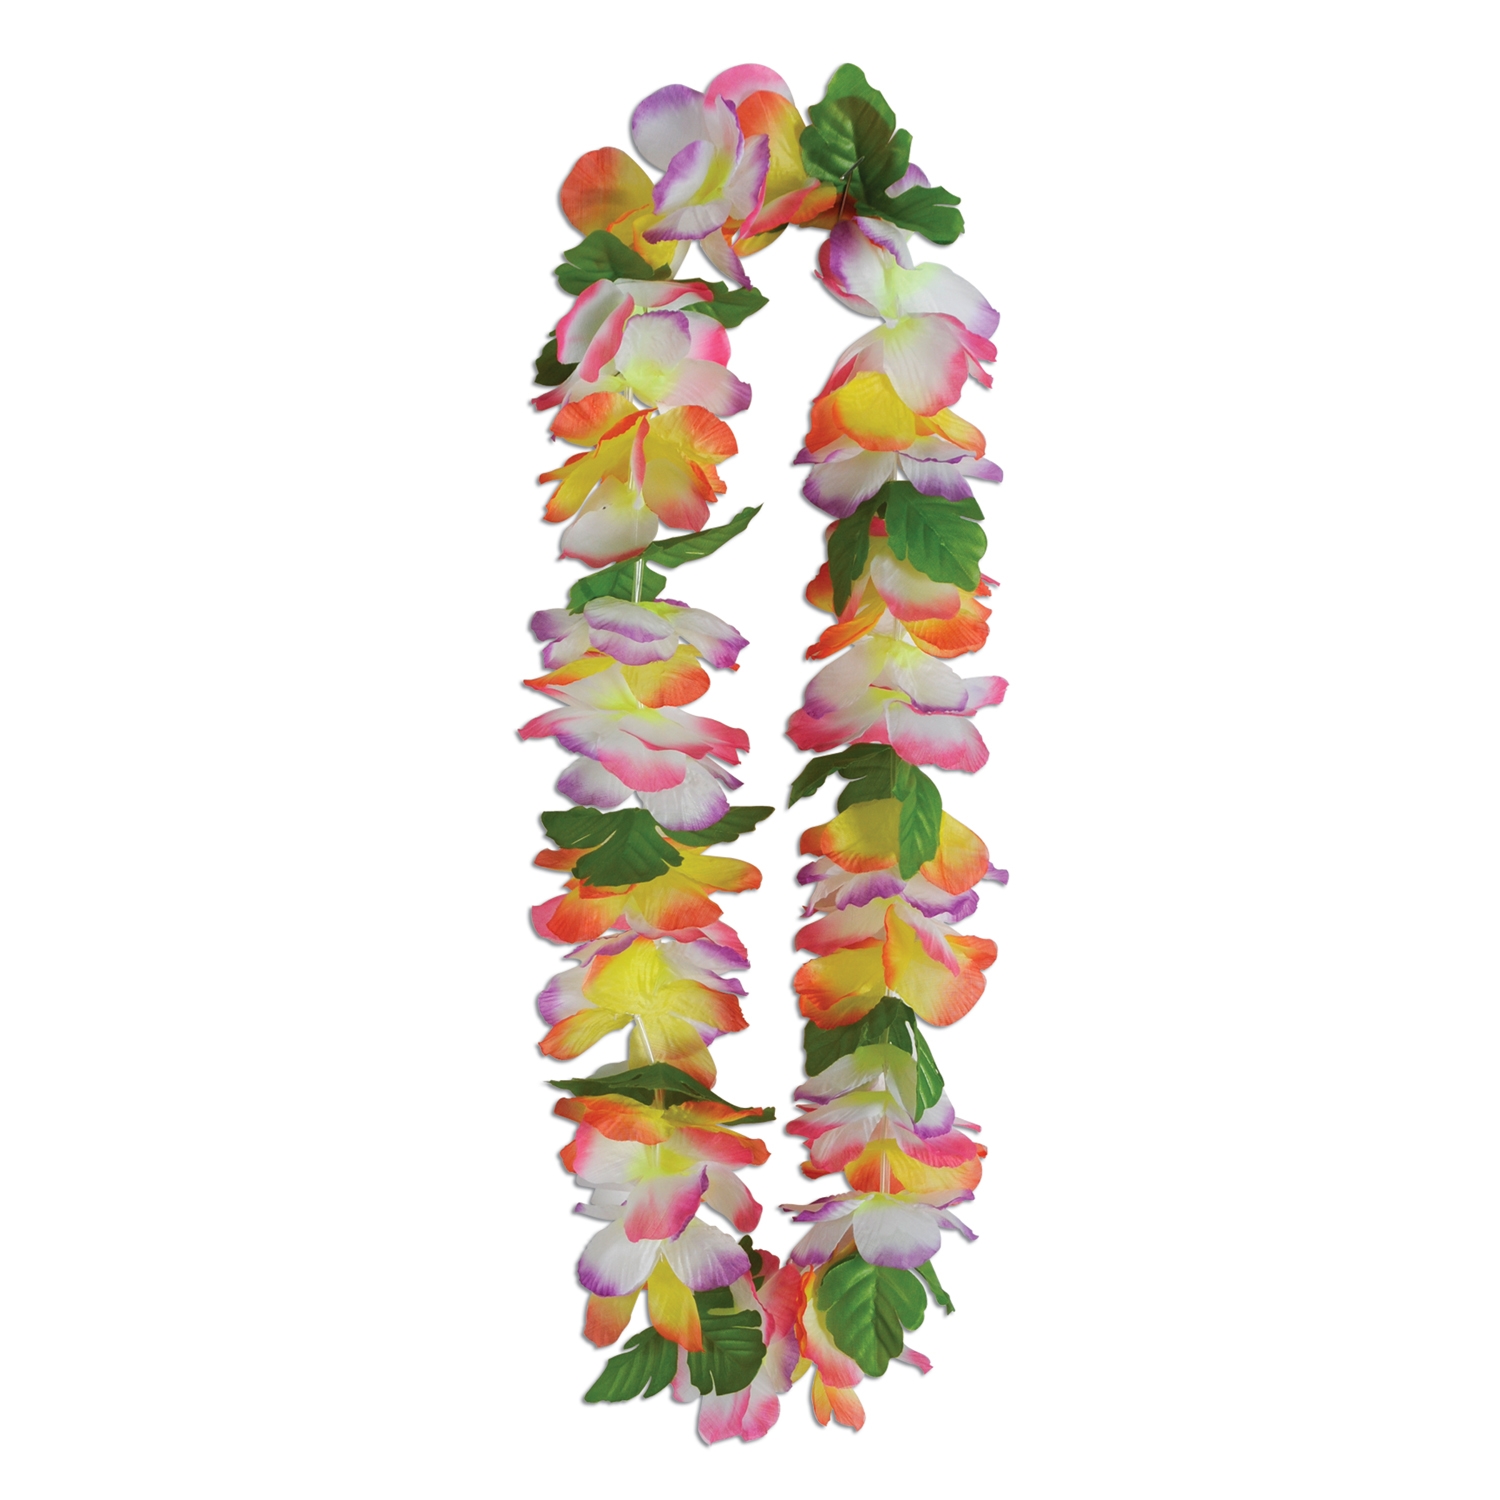 Silk lei with pink, purple, and yellow tropical petals.